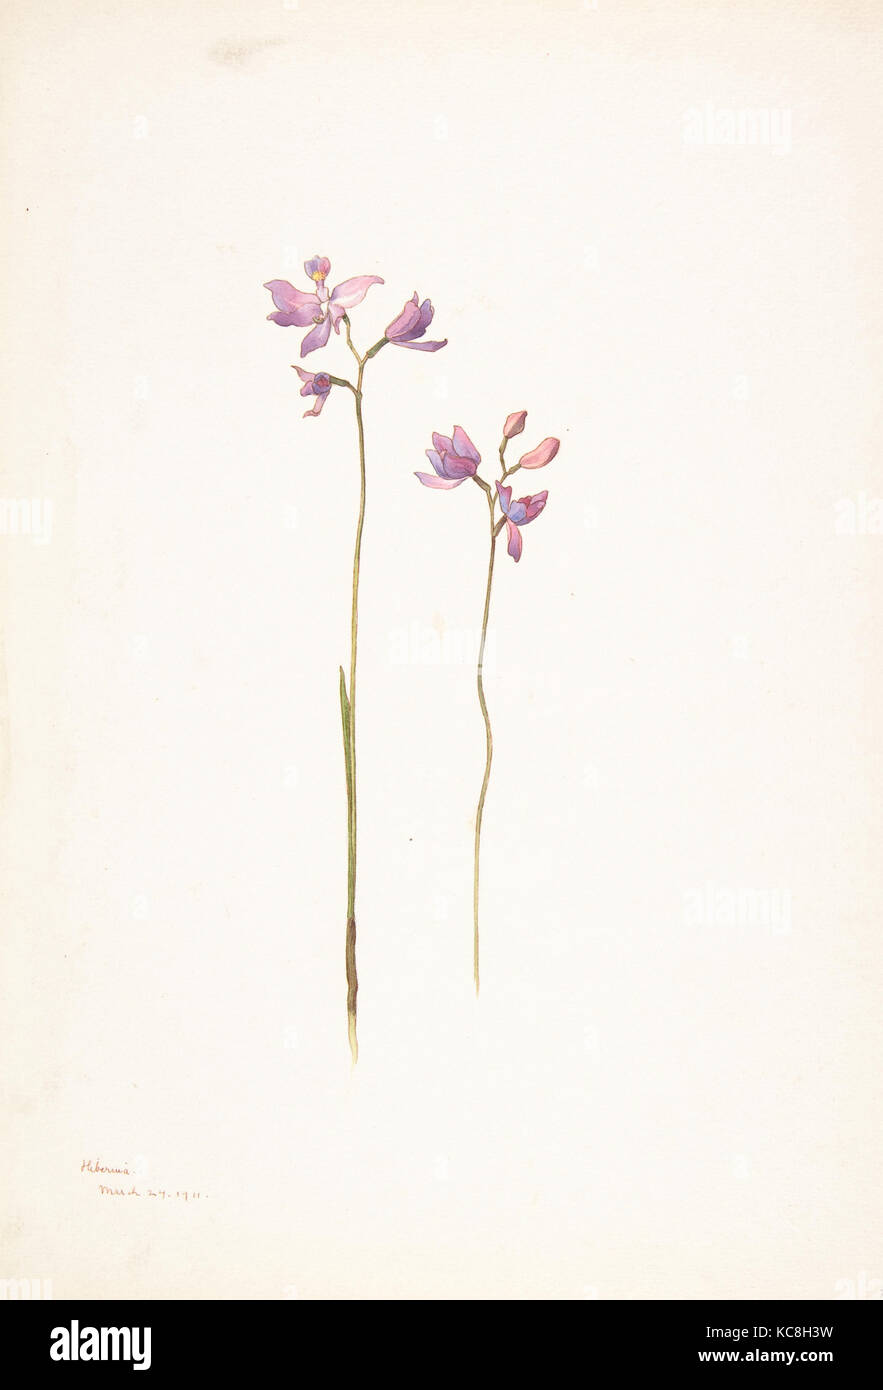 Purple Orchids or Lilies, Margaret Neilson Armstrong, March 24, 1911 Stock Photo